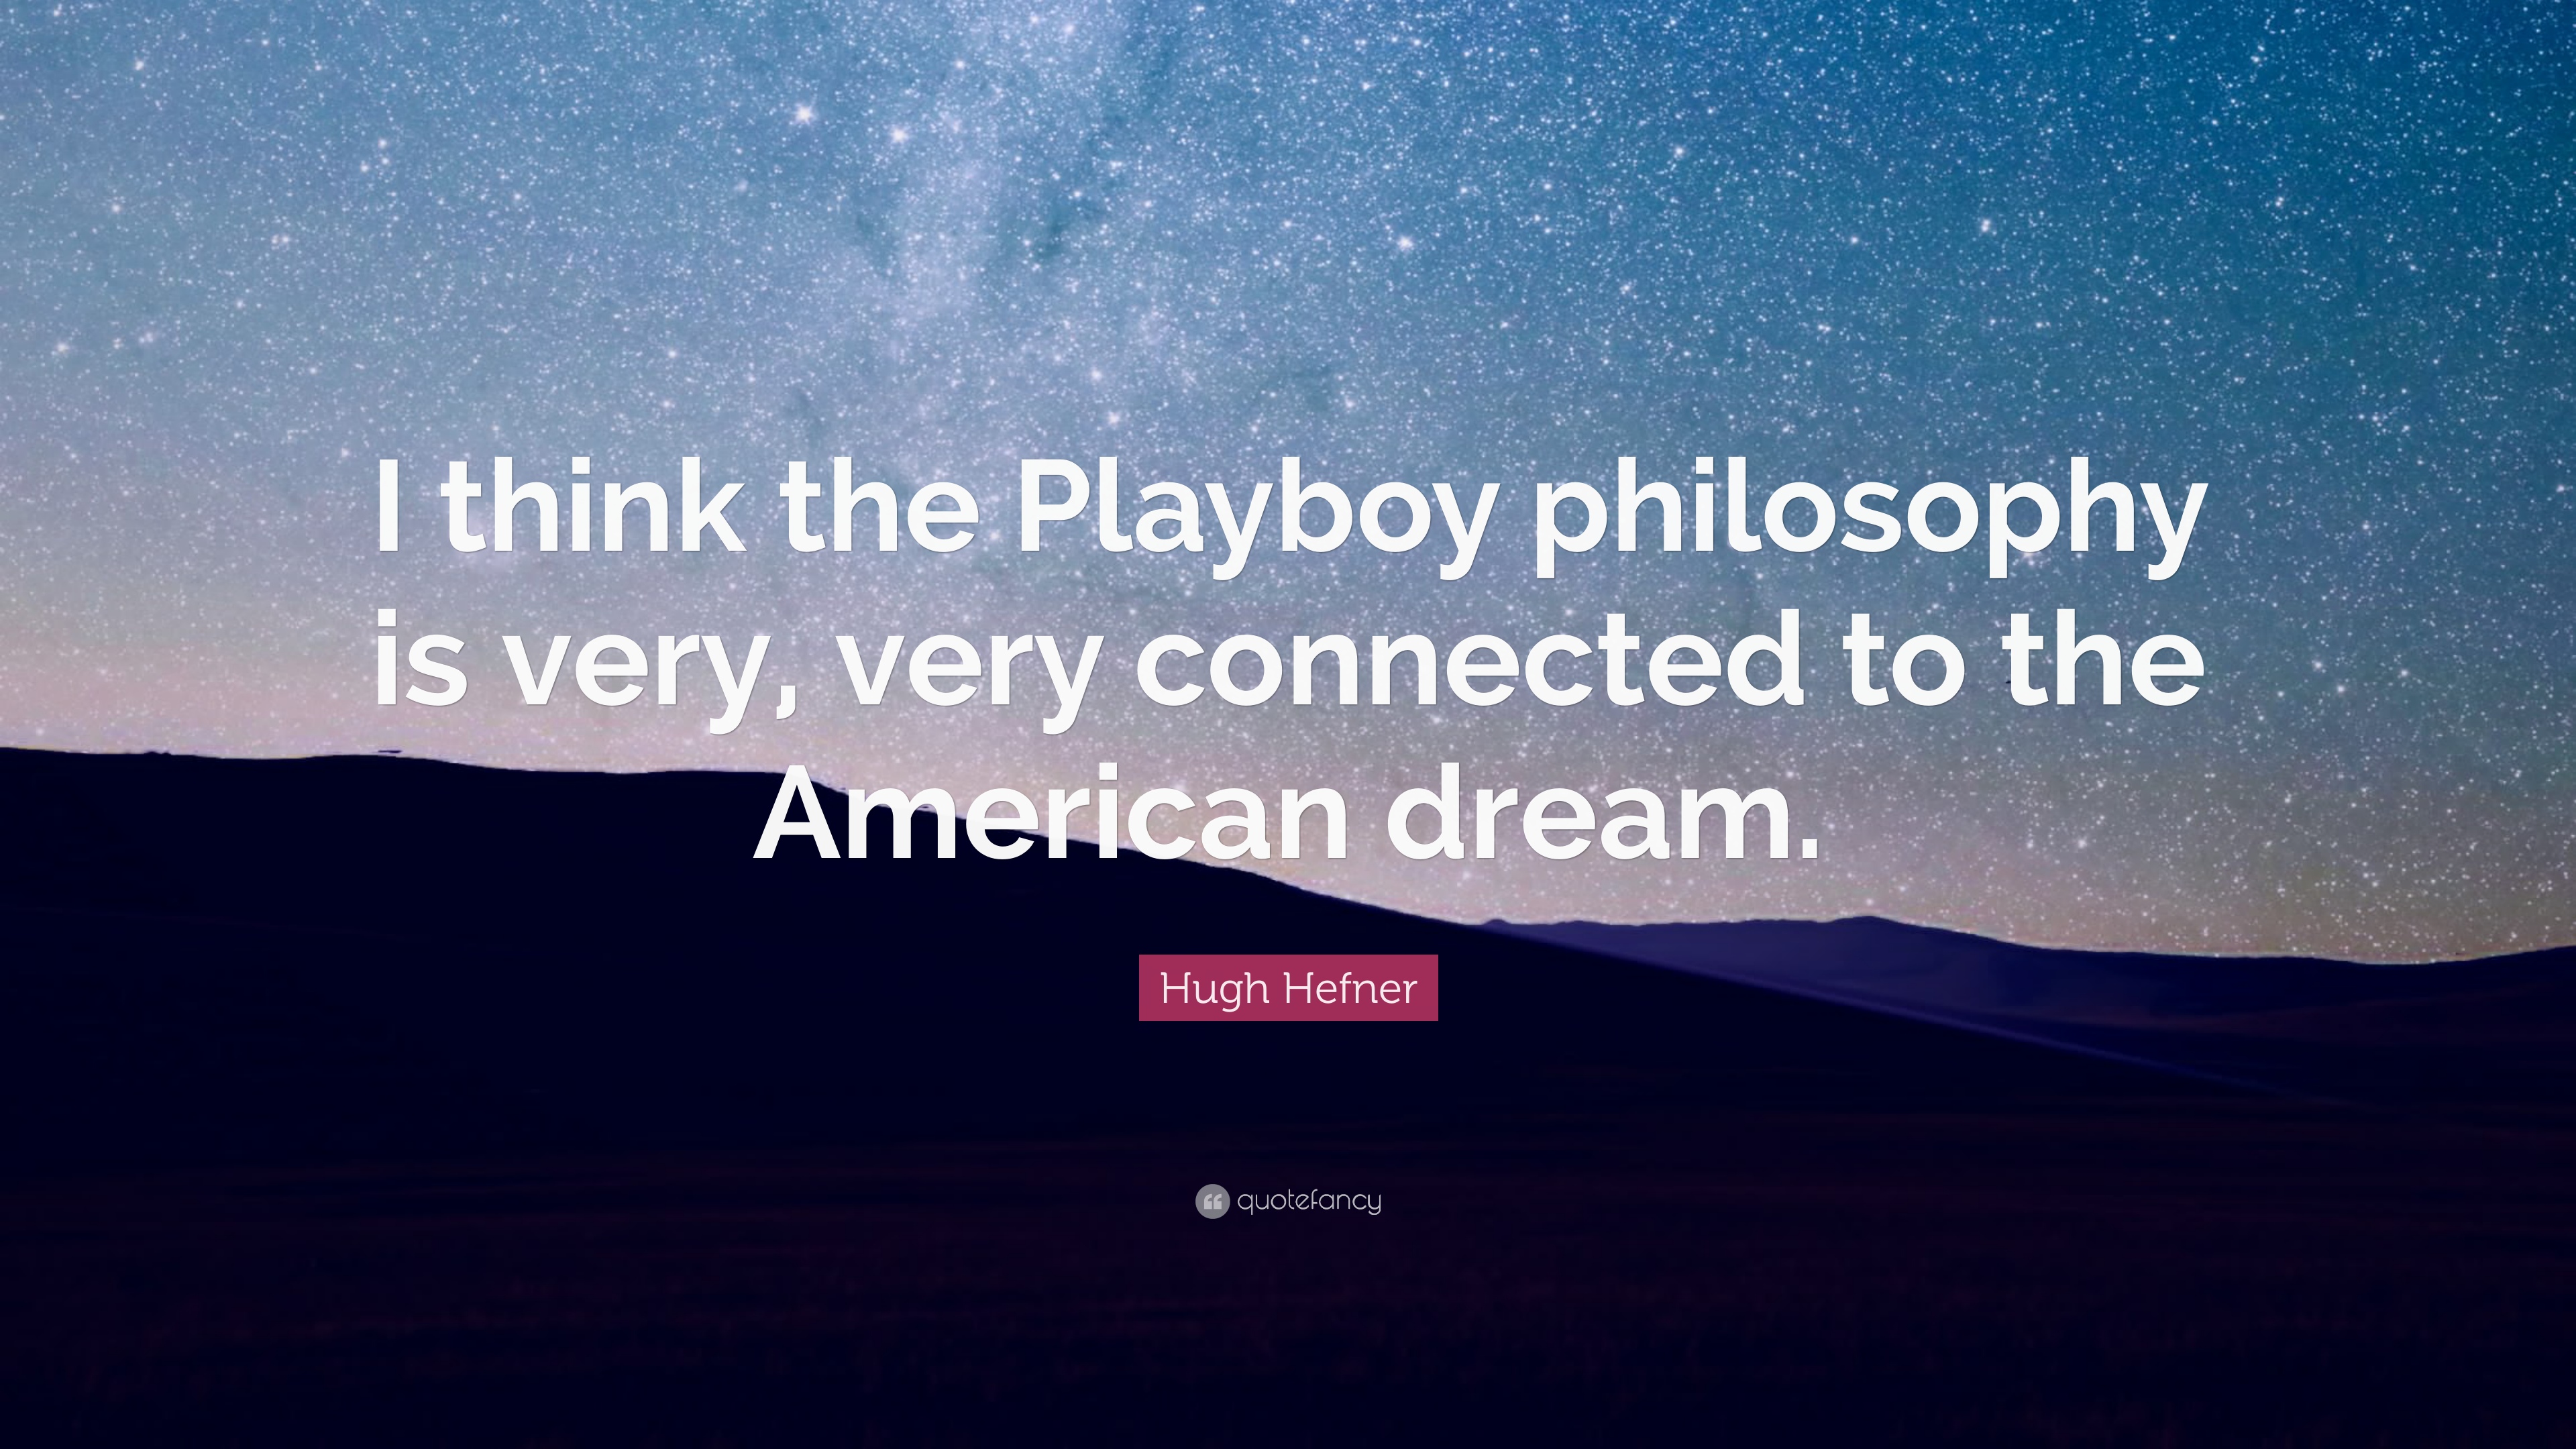 Hugh Hefner Quote: “I think the Playboy philosophy is very, very